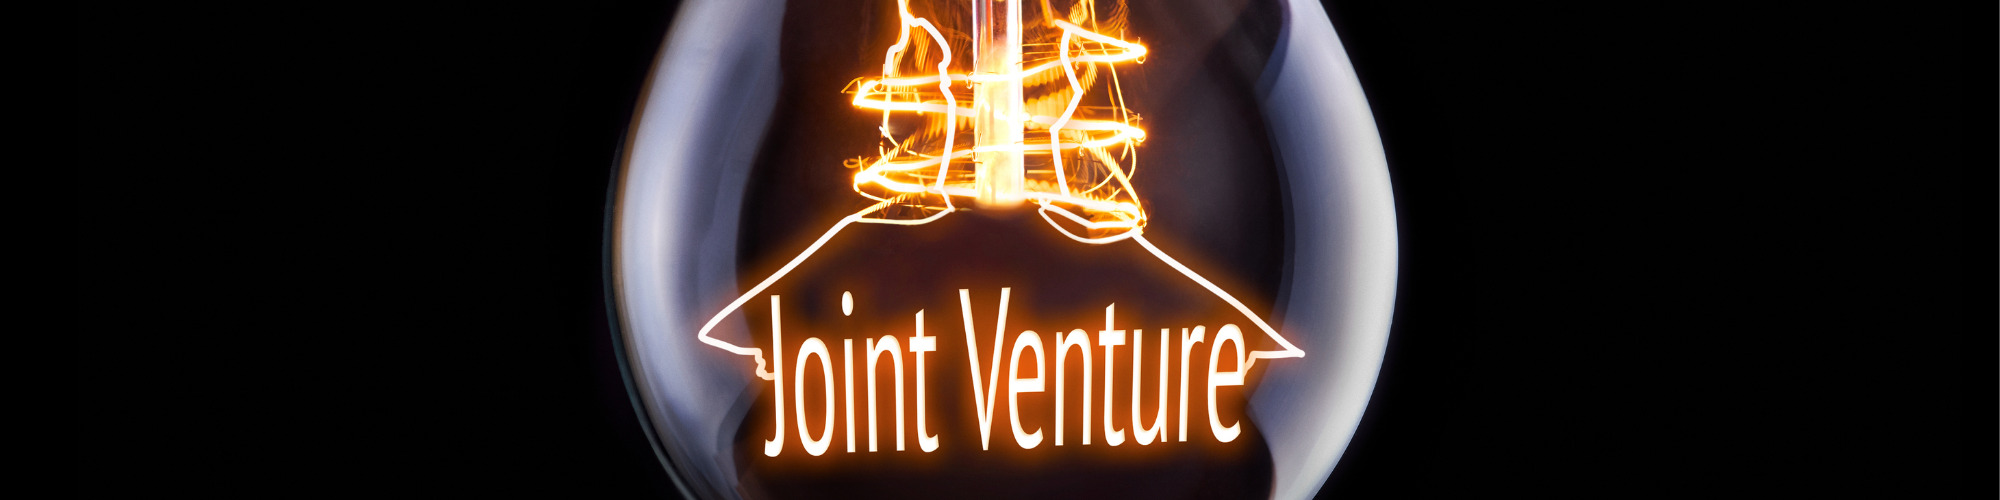 An Introduction to the Tax Aspects of Joint Ventures - In 1 Hour - Webinar